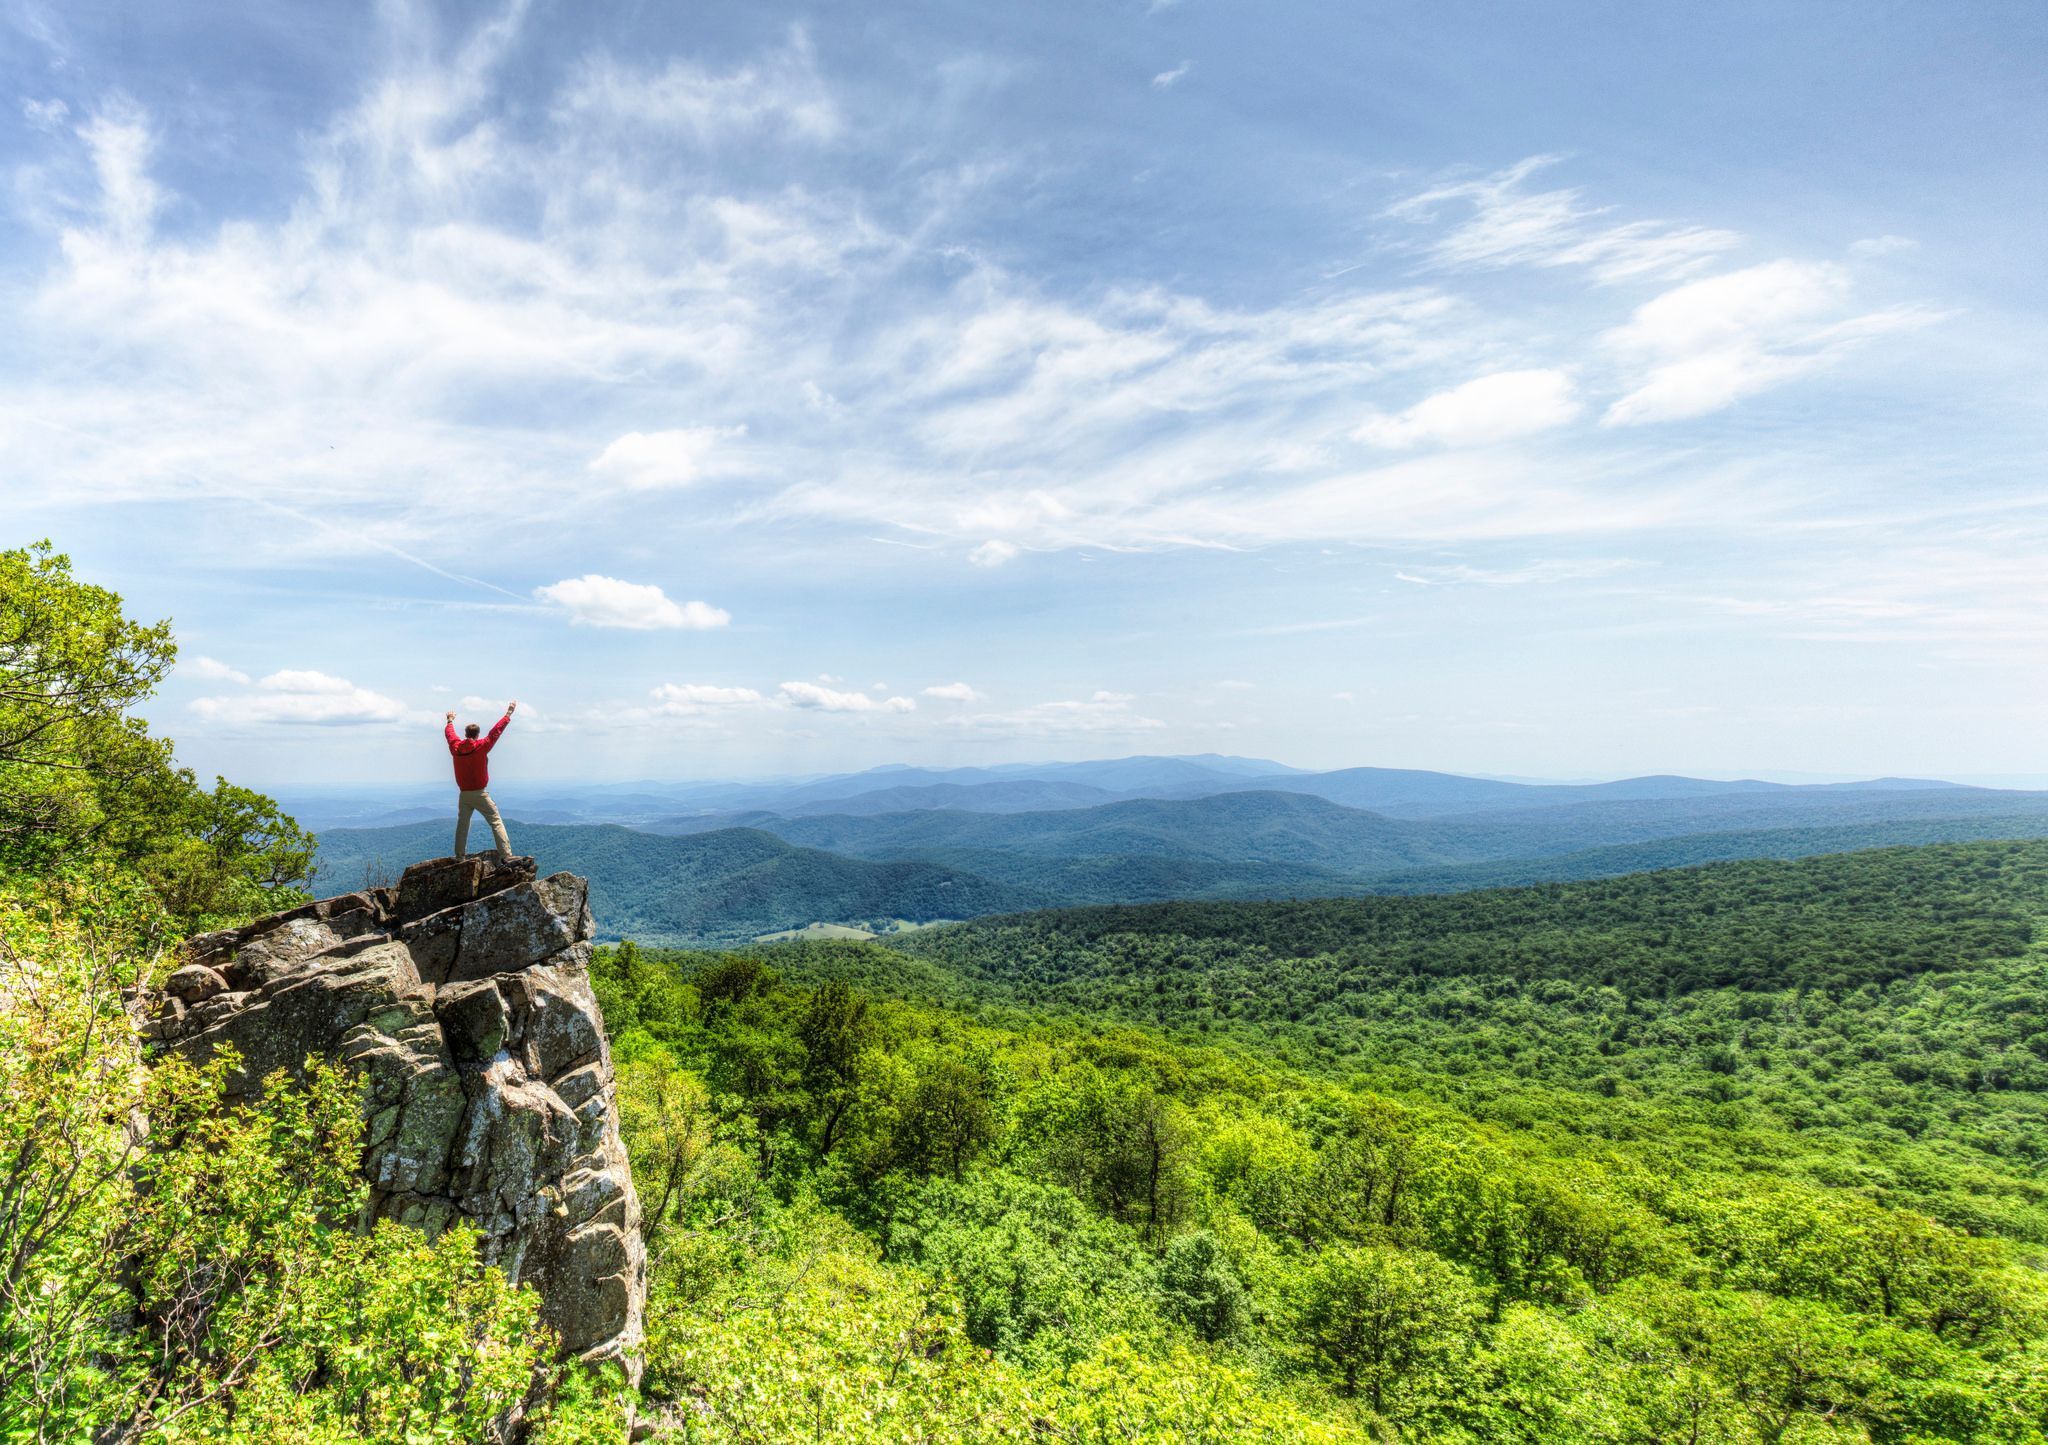 There are over 60 peaks with an elevation over 3,000 feet in Shenandoah.